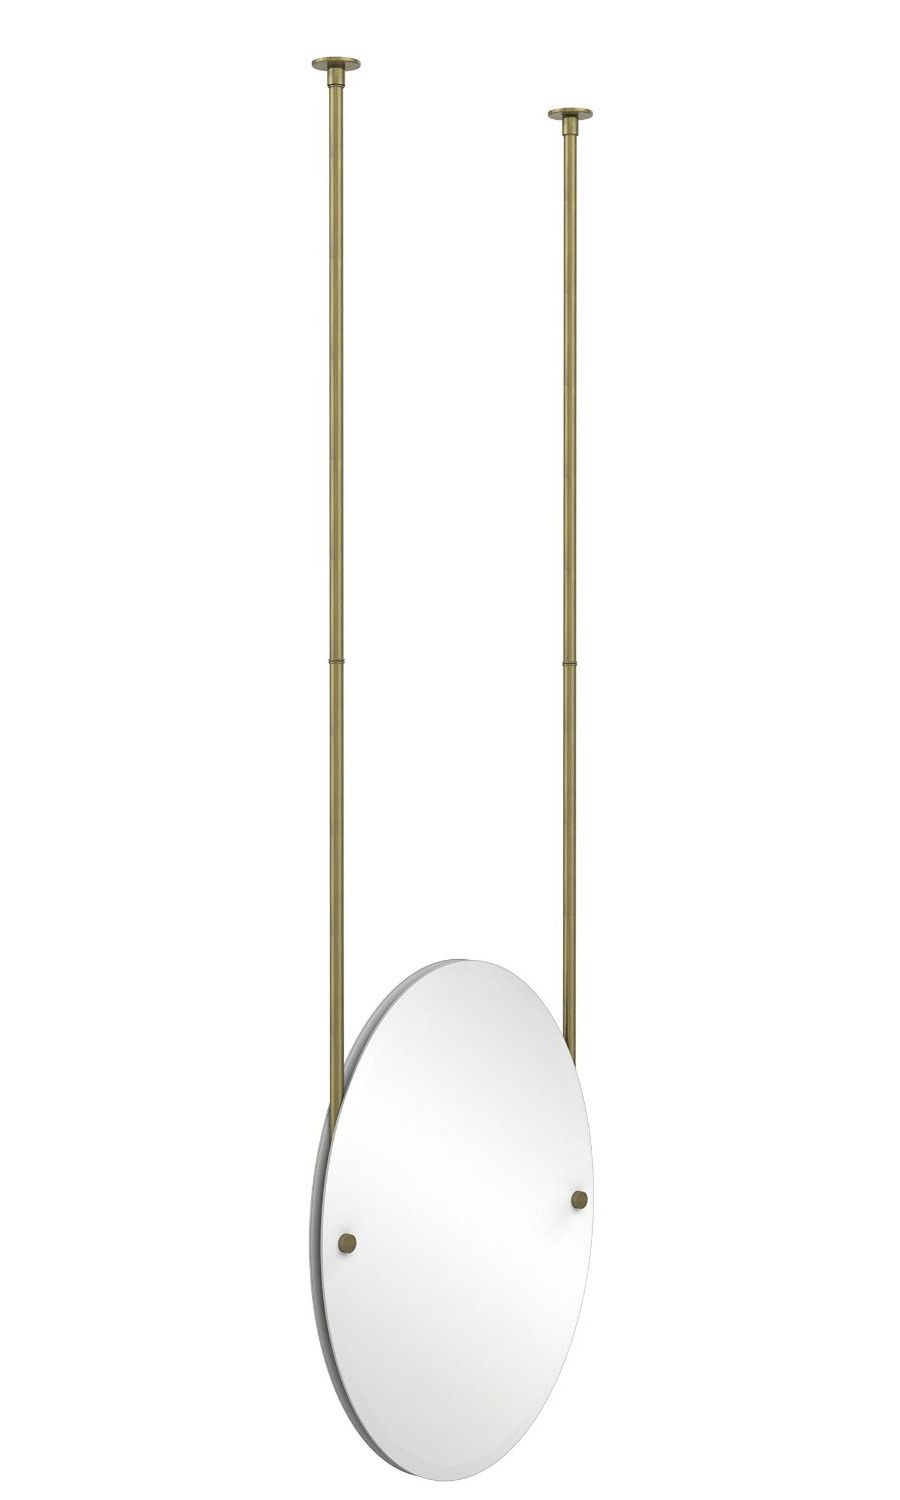 Allied Brass Ch 91 Oval Ceiling Hung Mirror With Solid Brass Hardware Pertaining To Ceiling Hung Polished Nickel Oval Mirrors (View 6 of 15)